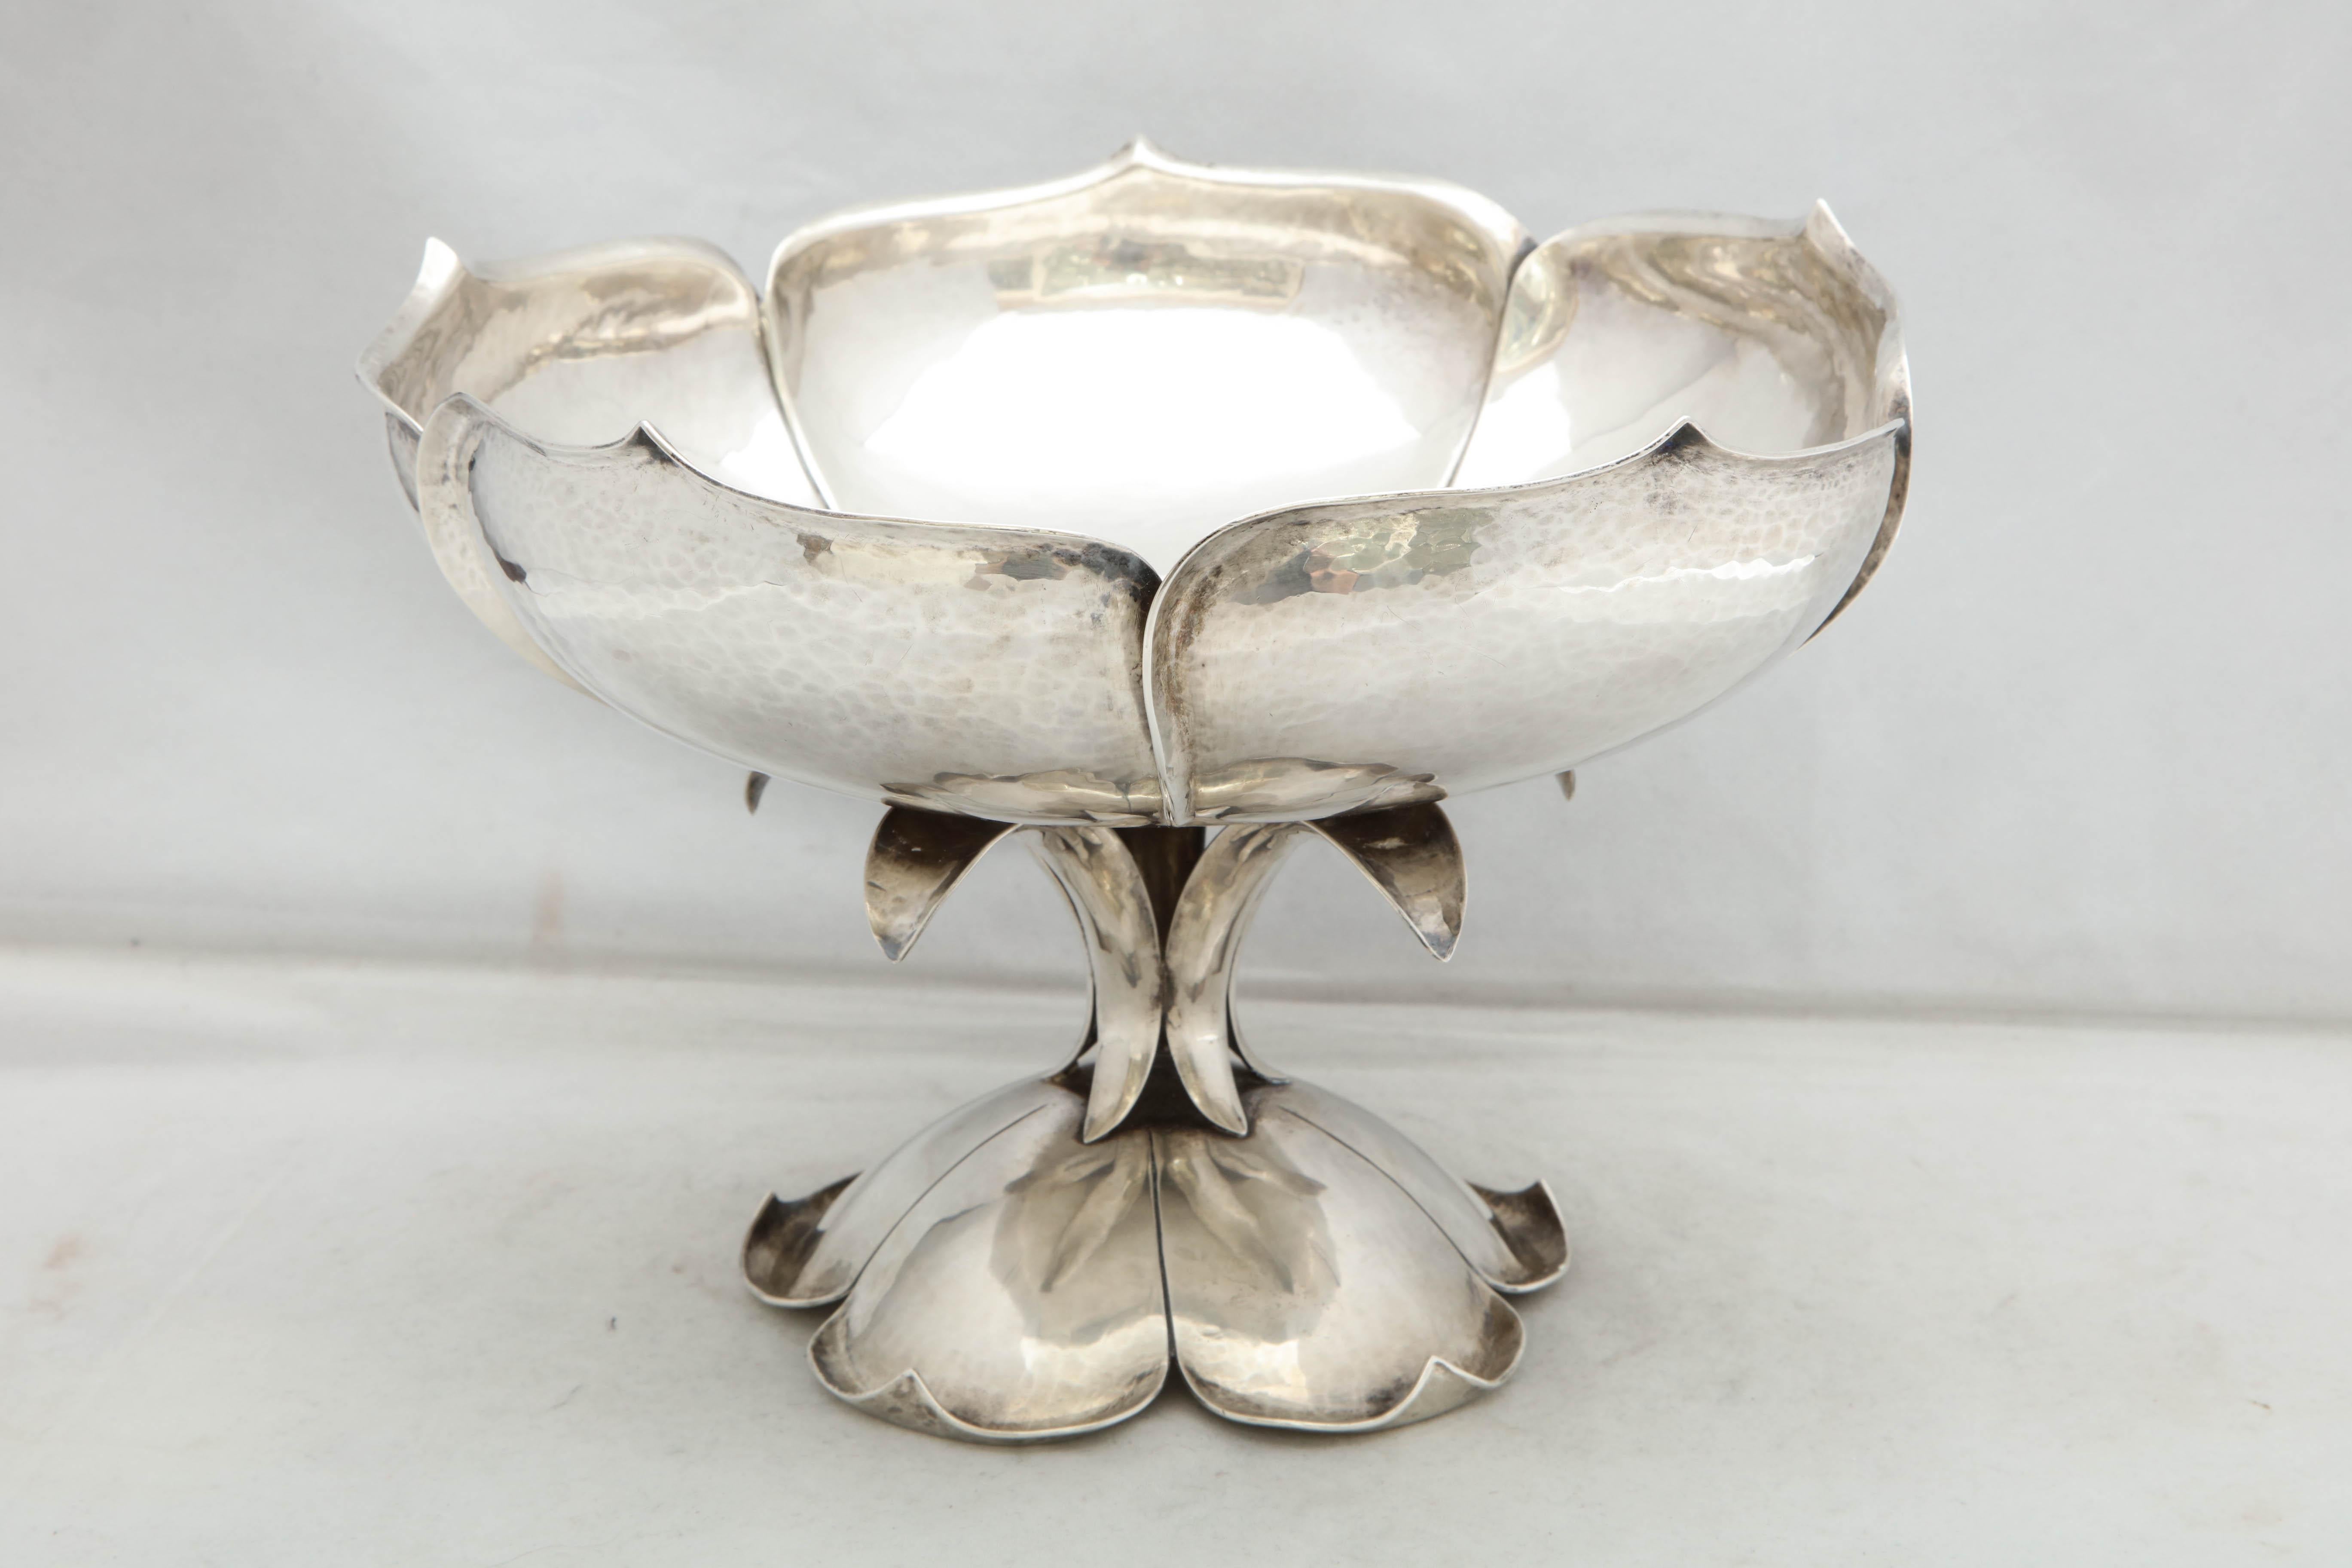 American Arts & Crafts Sterling Silver Lotus-Form Centerpiece Bowl by The Cellini Shop